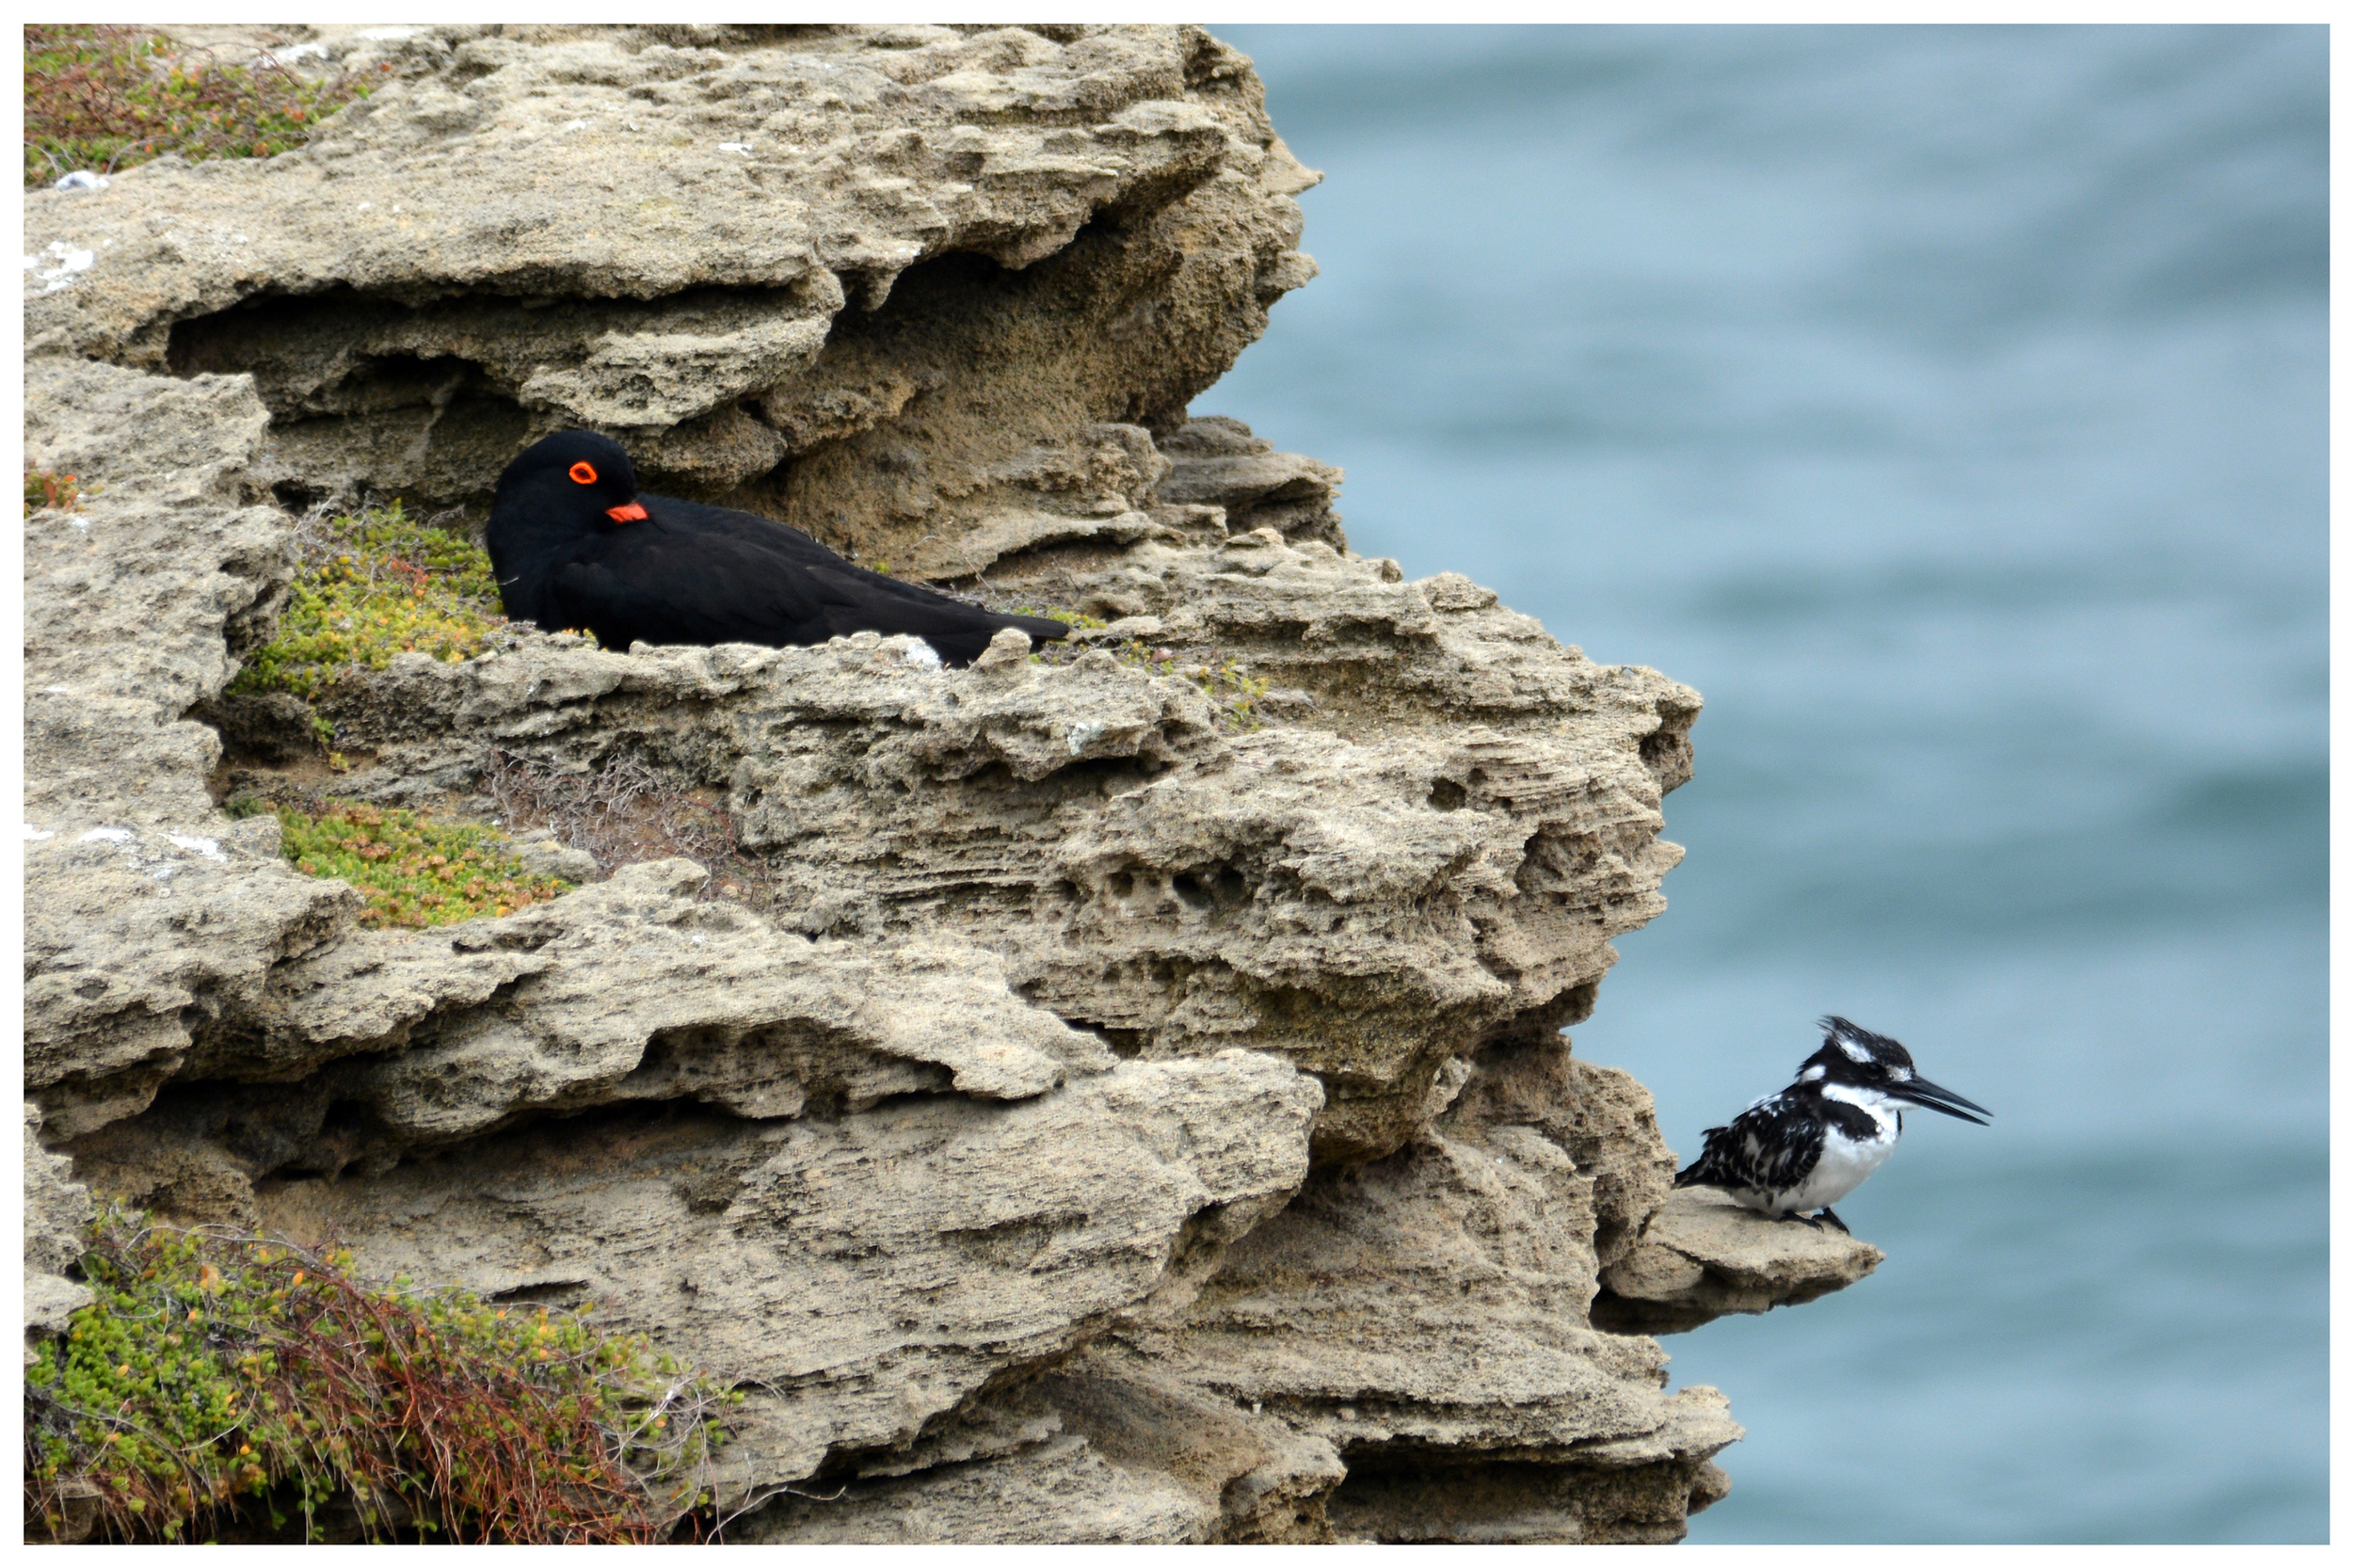 African Black Oystercatcher and Pied Kingfisher